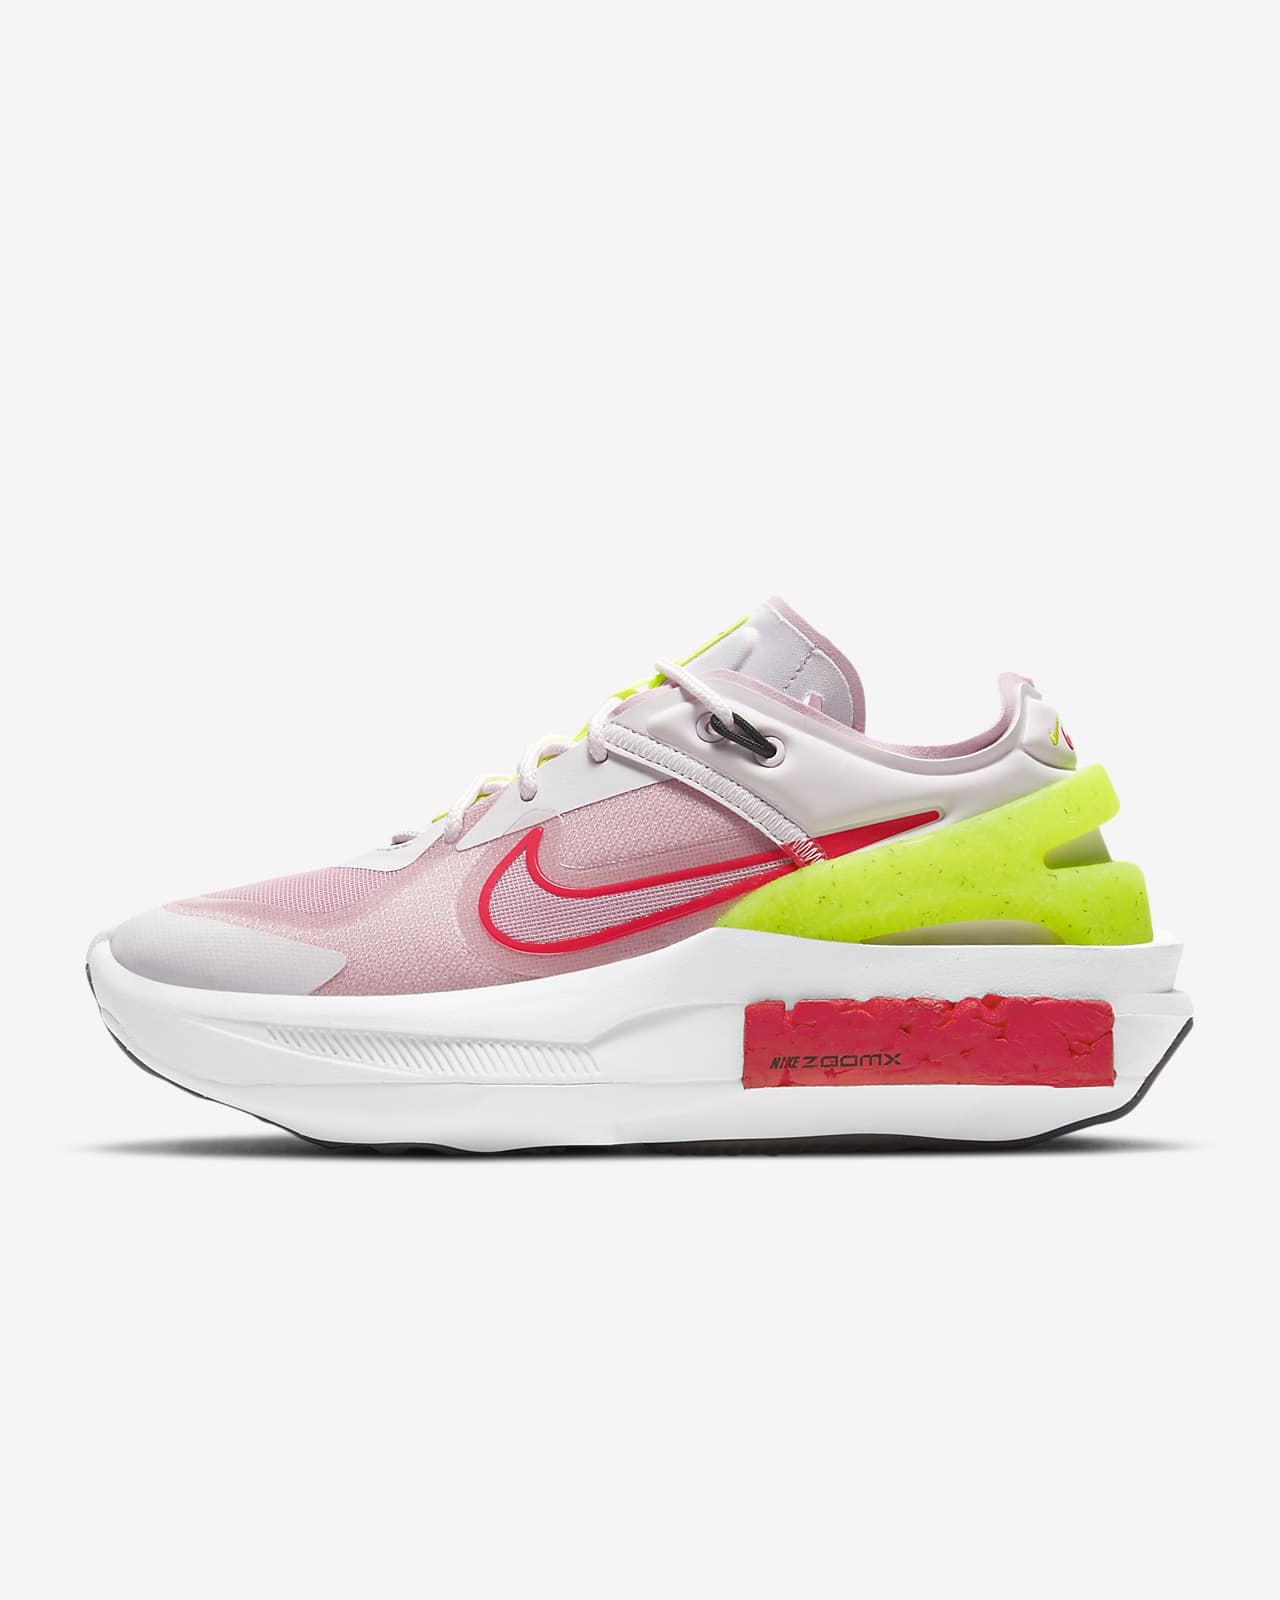 nike shoes with pink swoosh